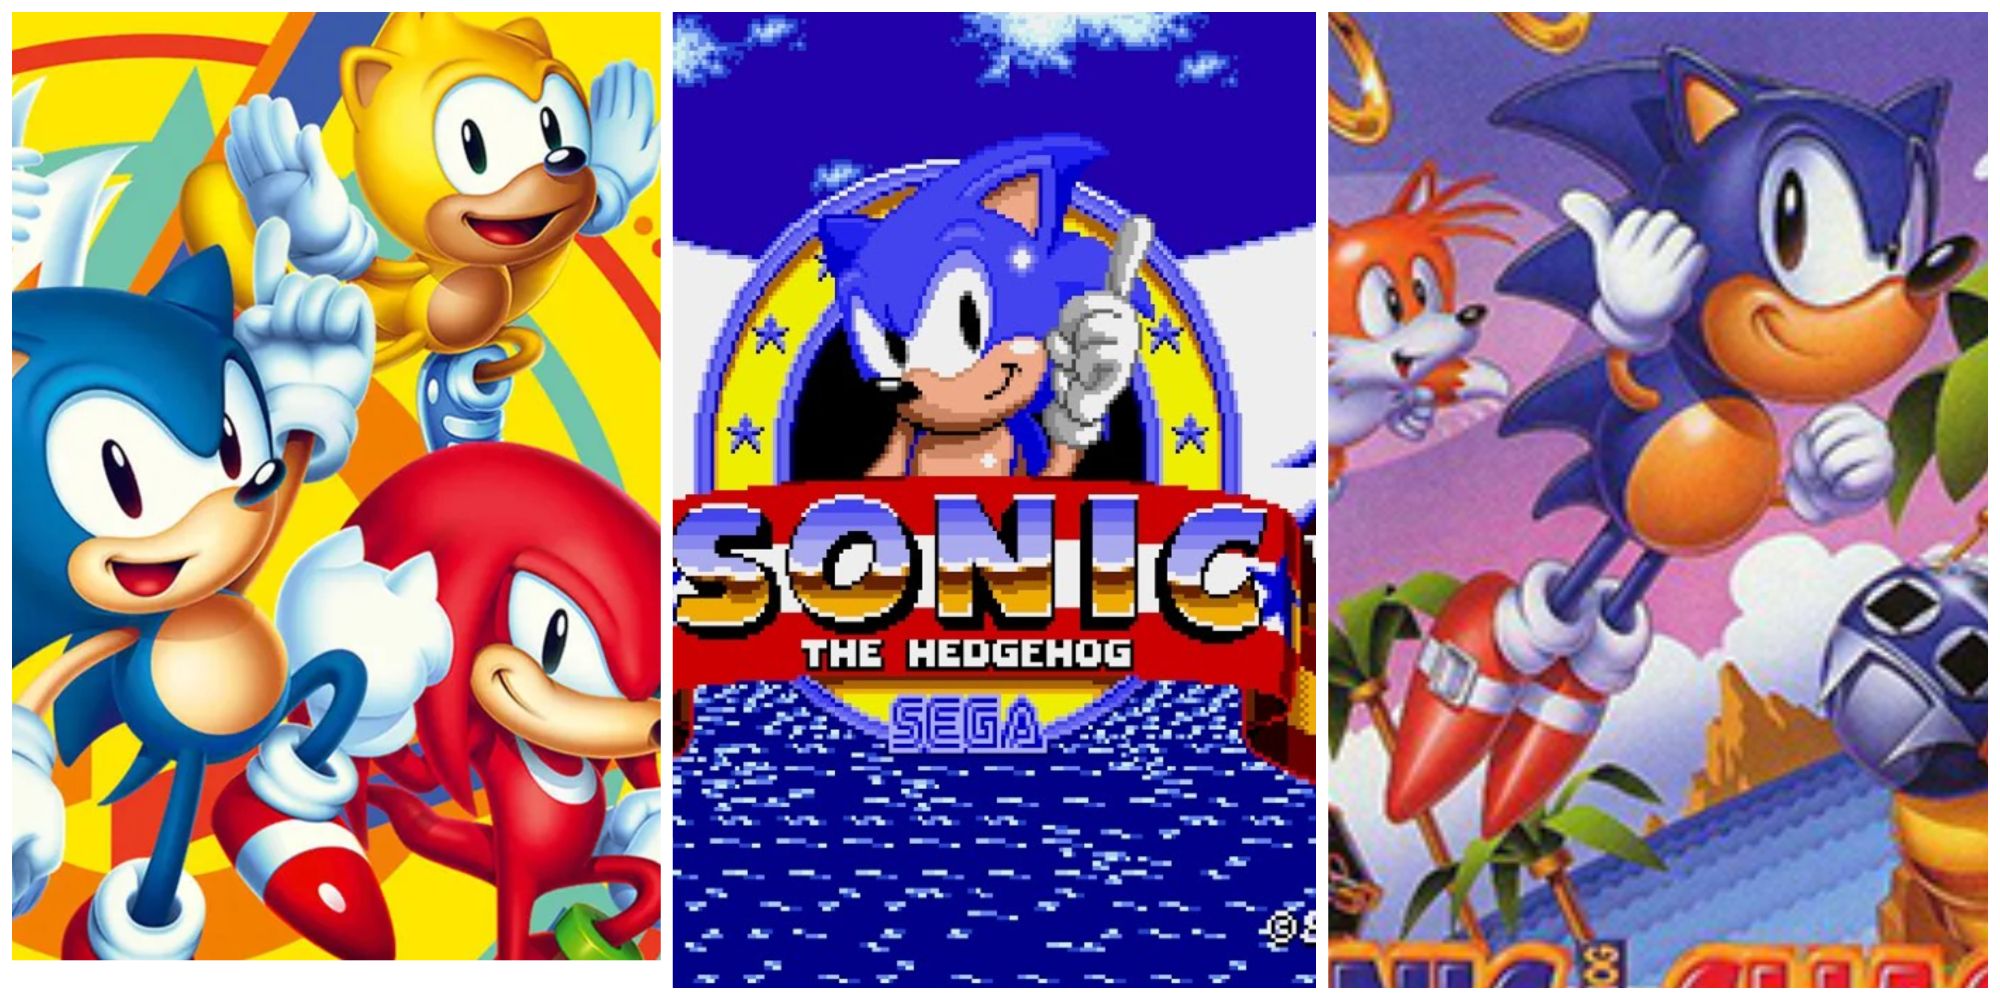 Sonic The Hedgehog: Iconic Themes From The Mainline Games